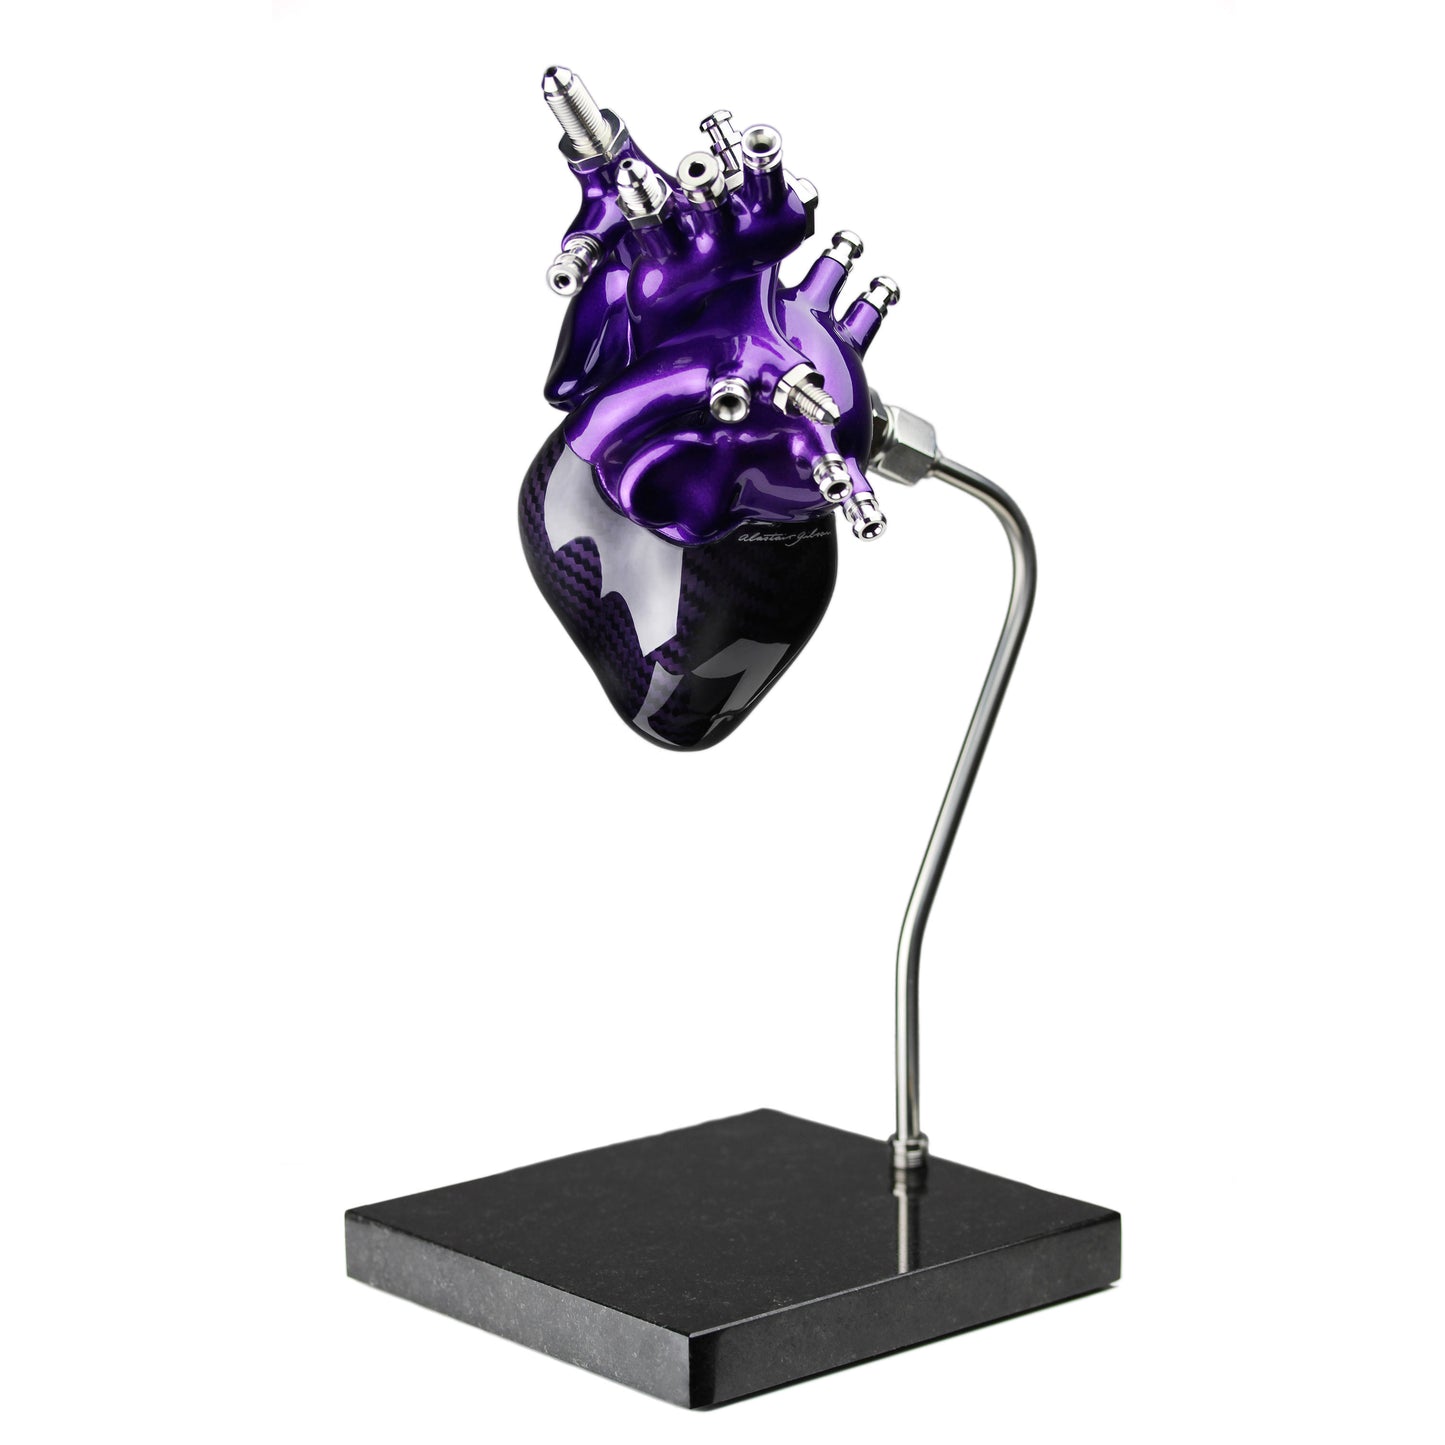 Carbon fibre human heart with purple tint and painted detail on a granite base